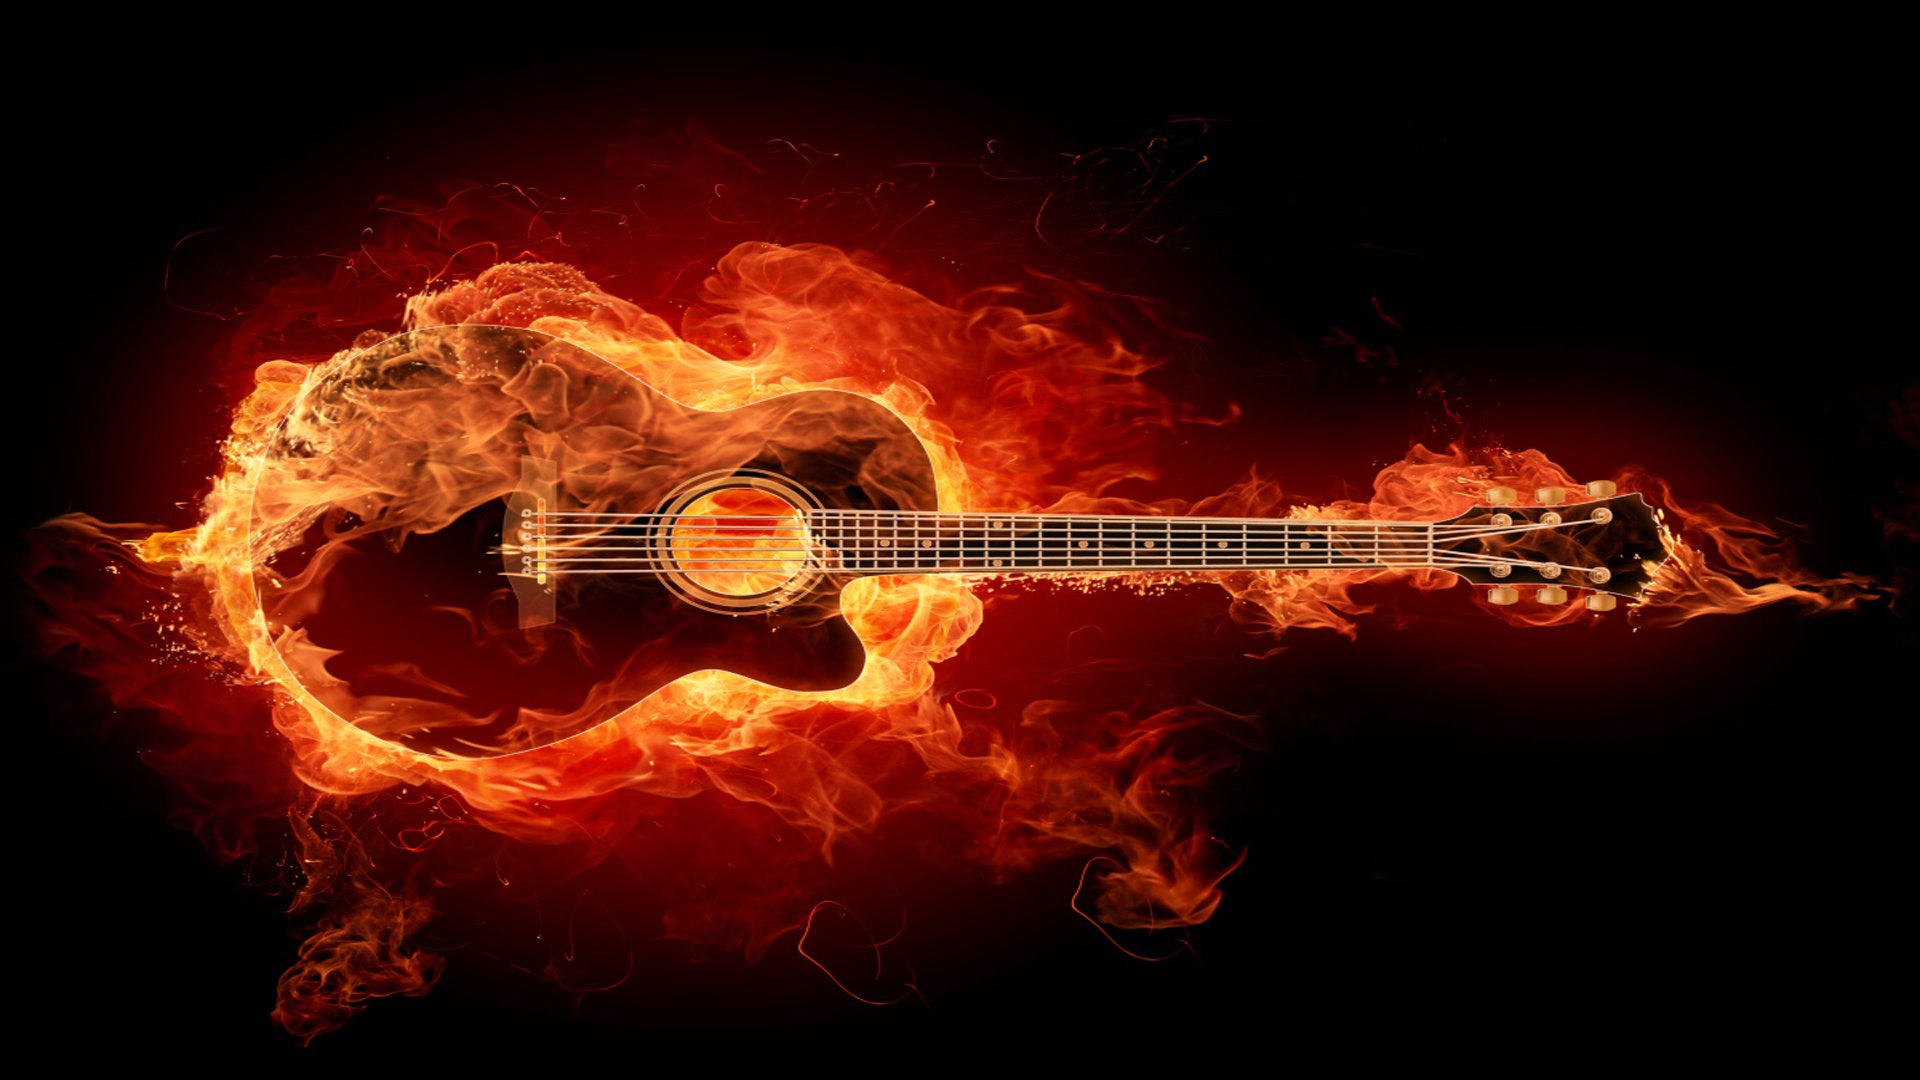 Guitar In Flames - WallDevil